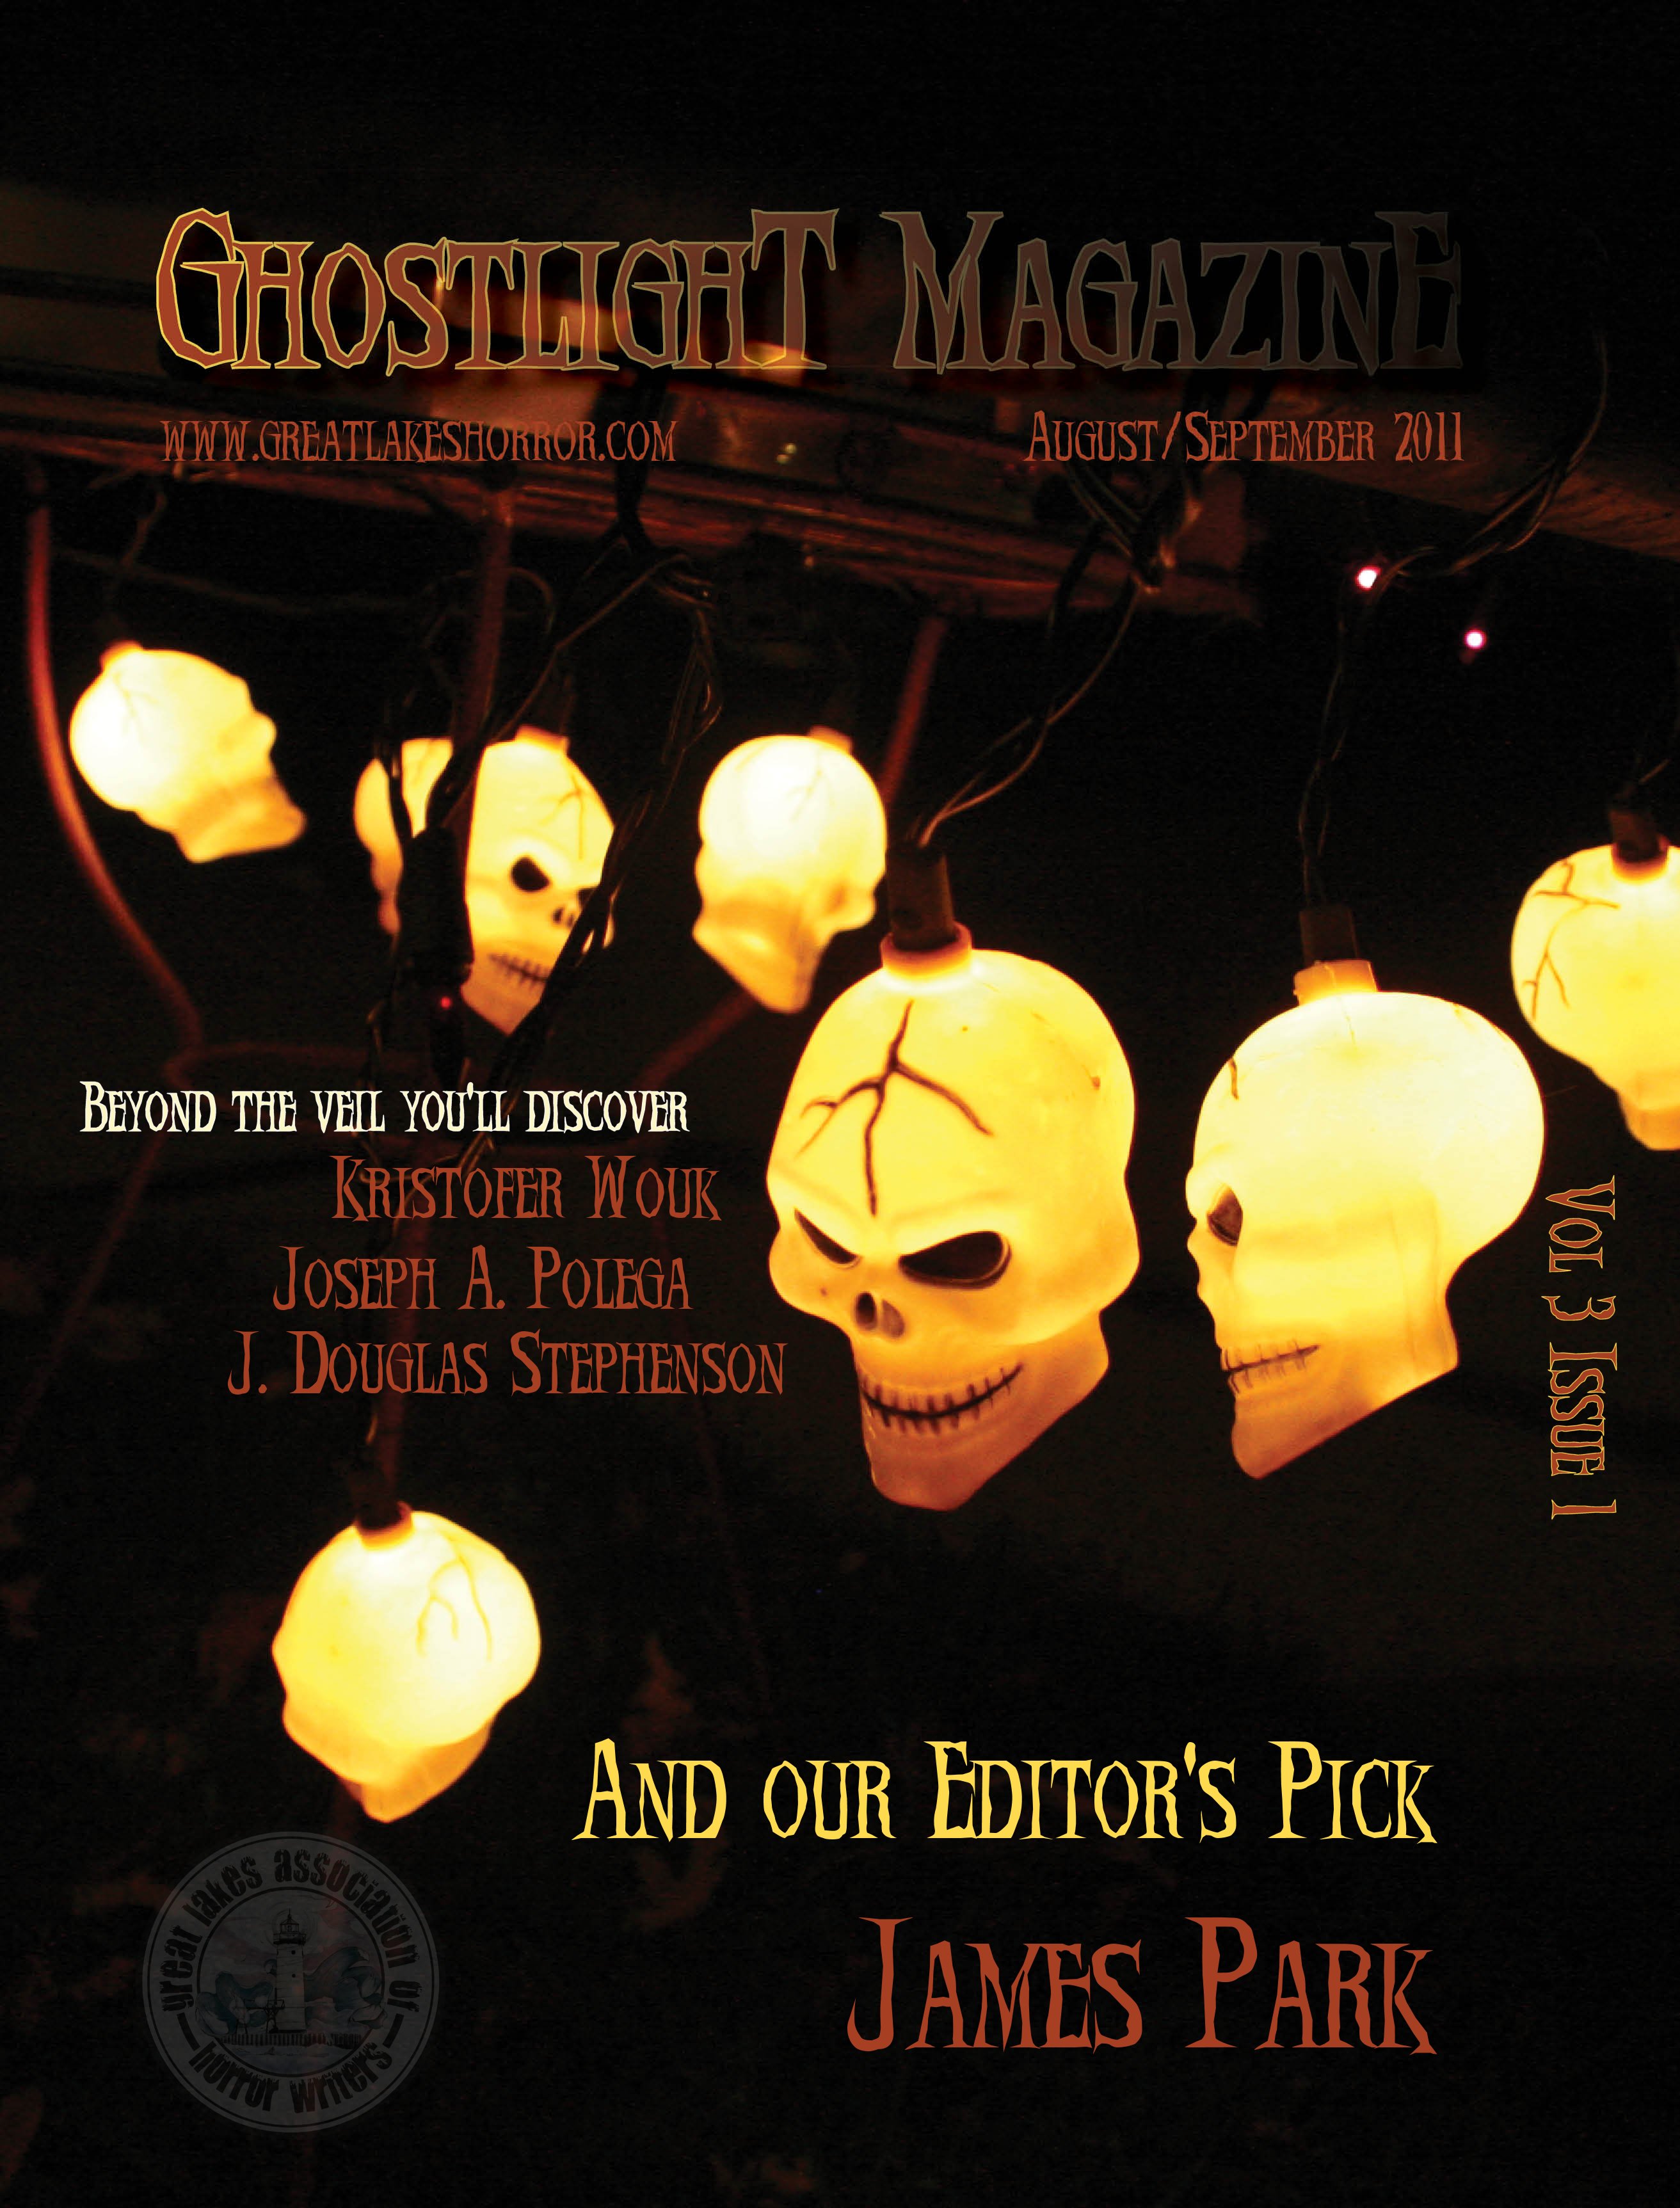 TOC Announced for Ghostlight, The Magazine of Terror